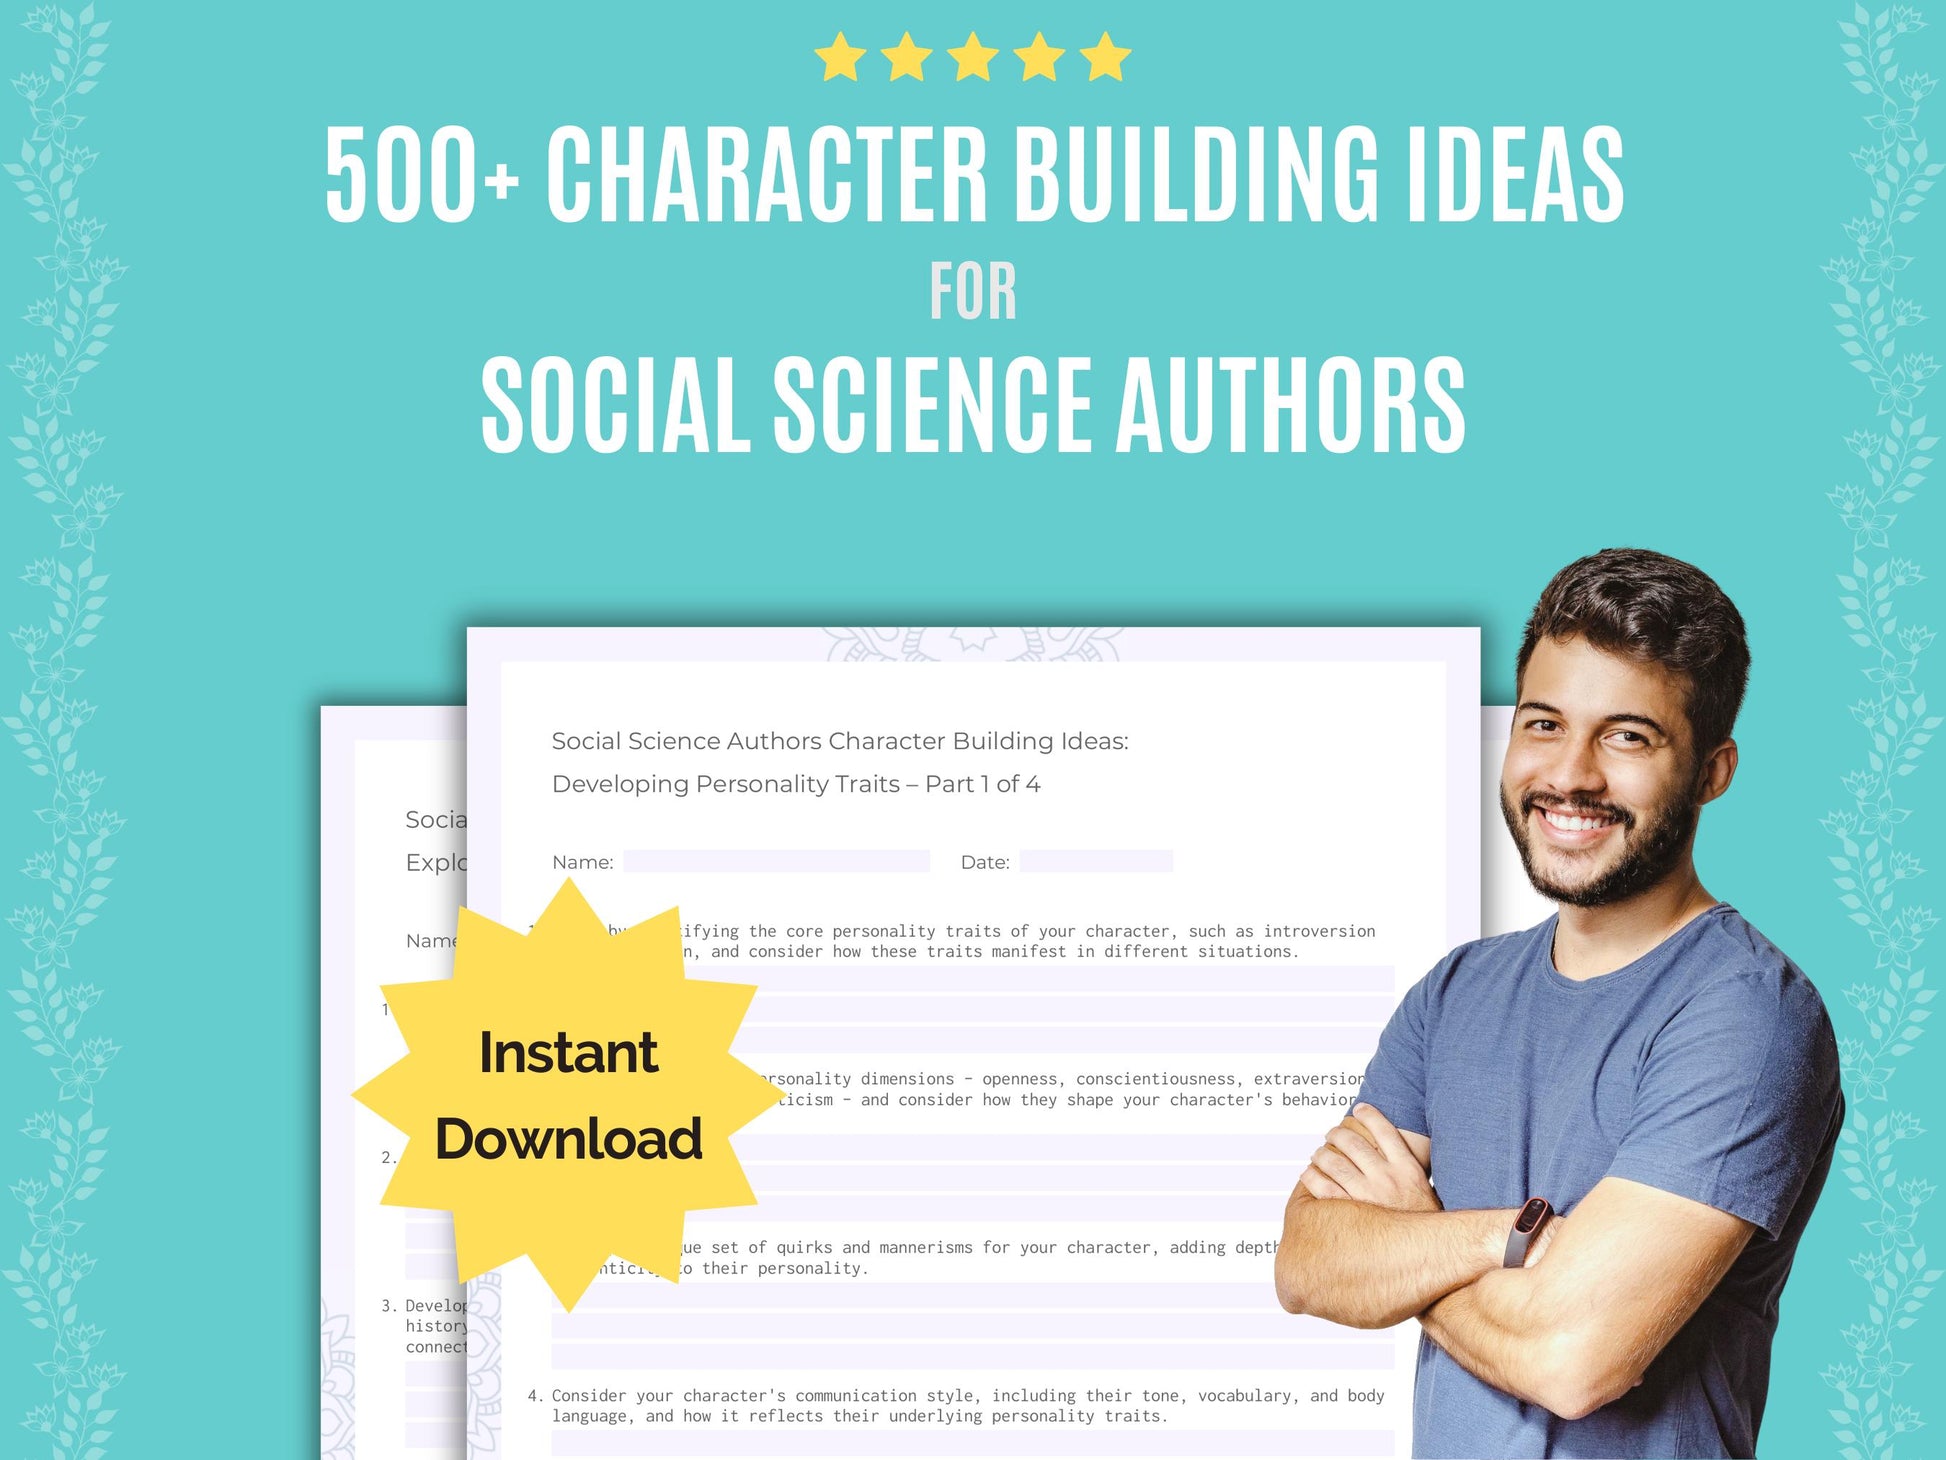 Social Science Authors Character Building Ideas